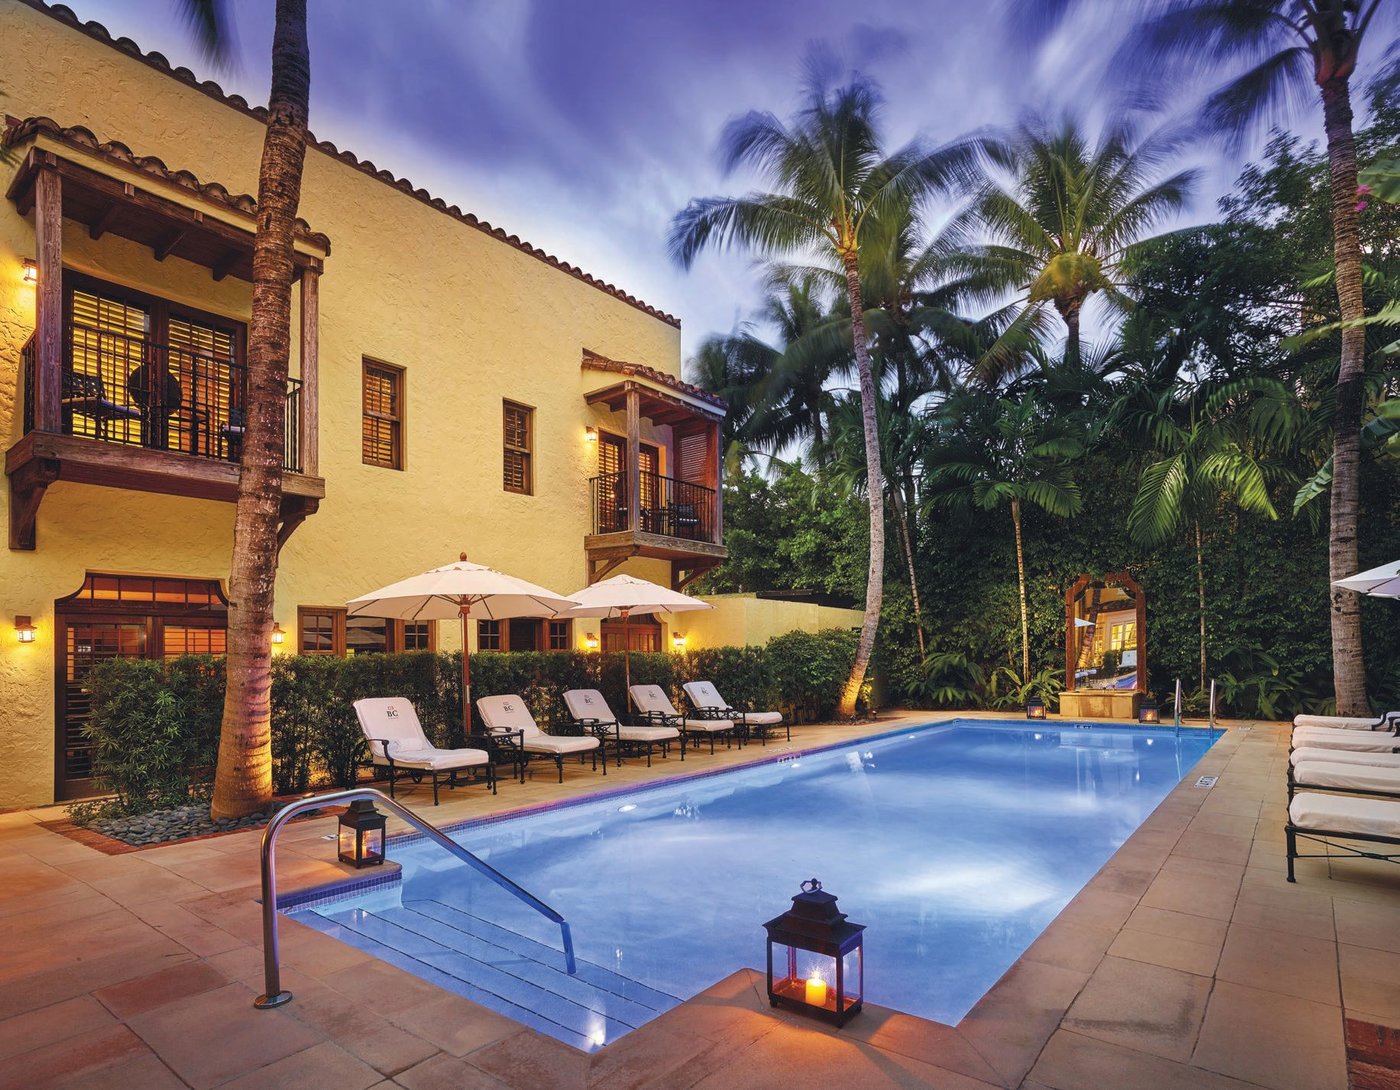 Since it opened in 1926, The Brazilian Court hotel has been known for its distinct Mediterranean style. 